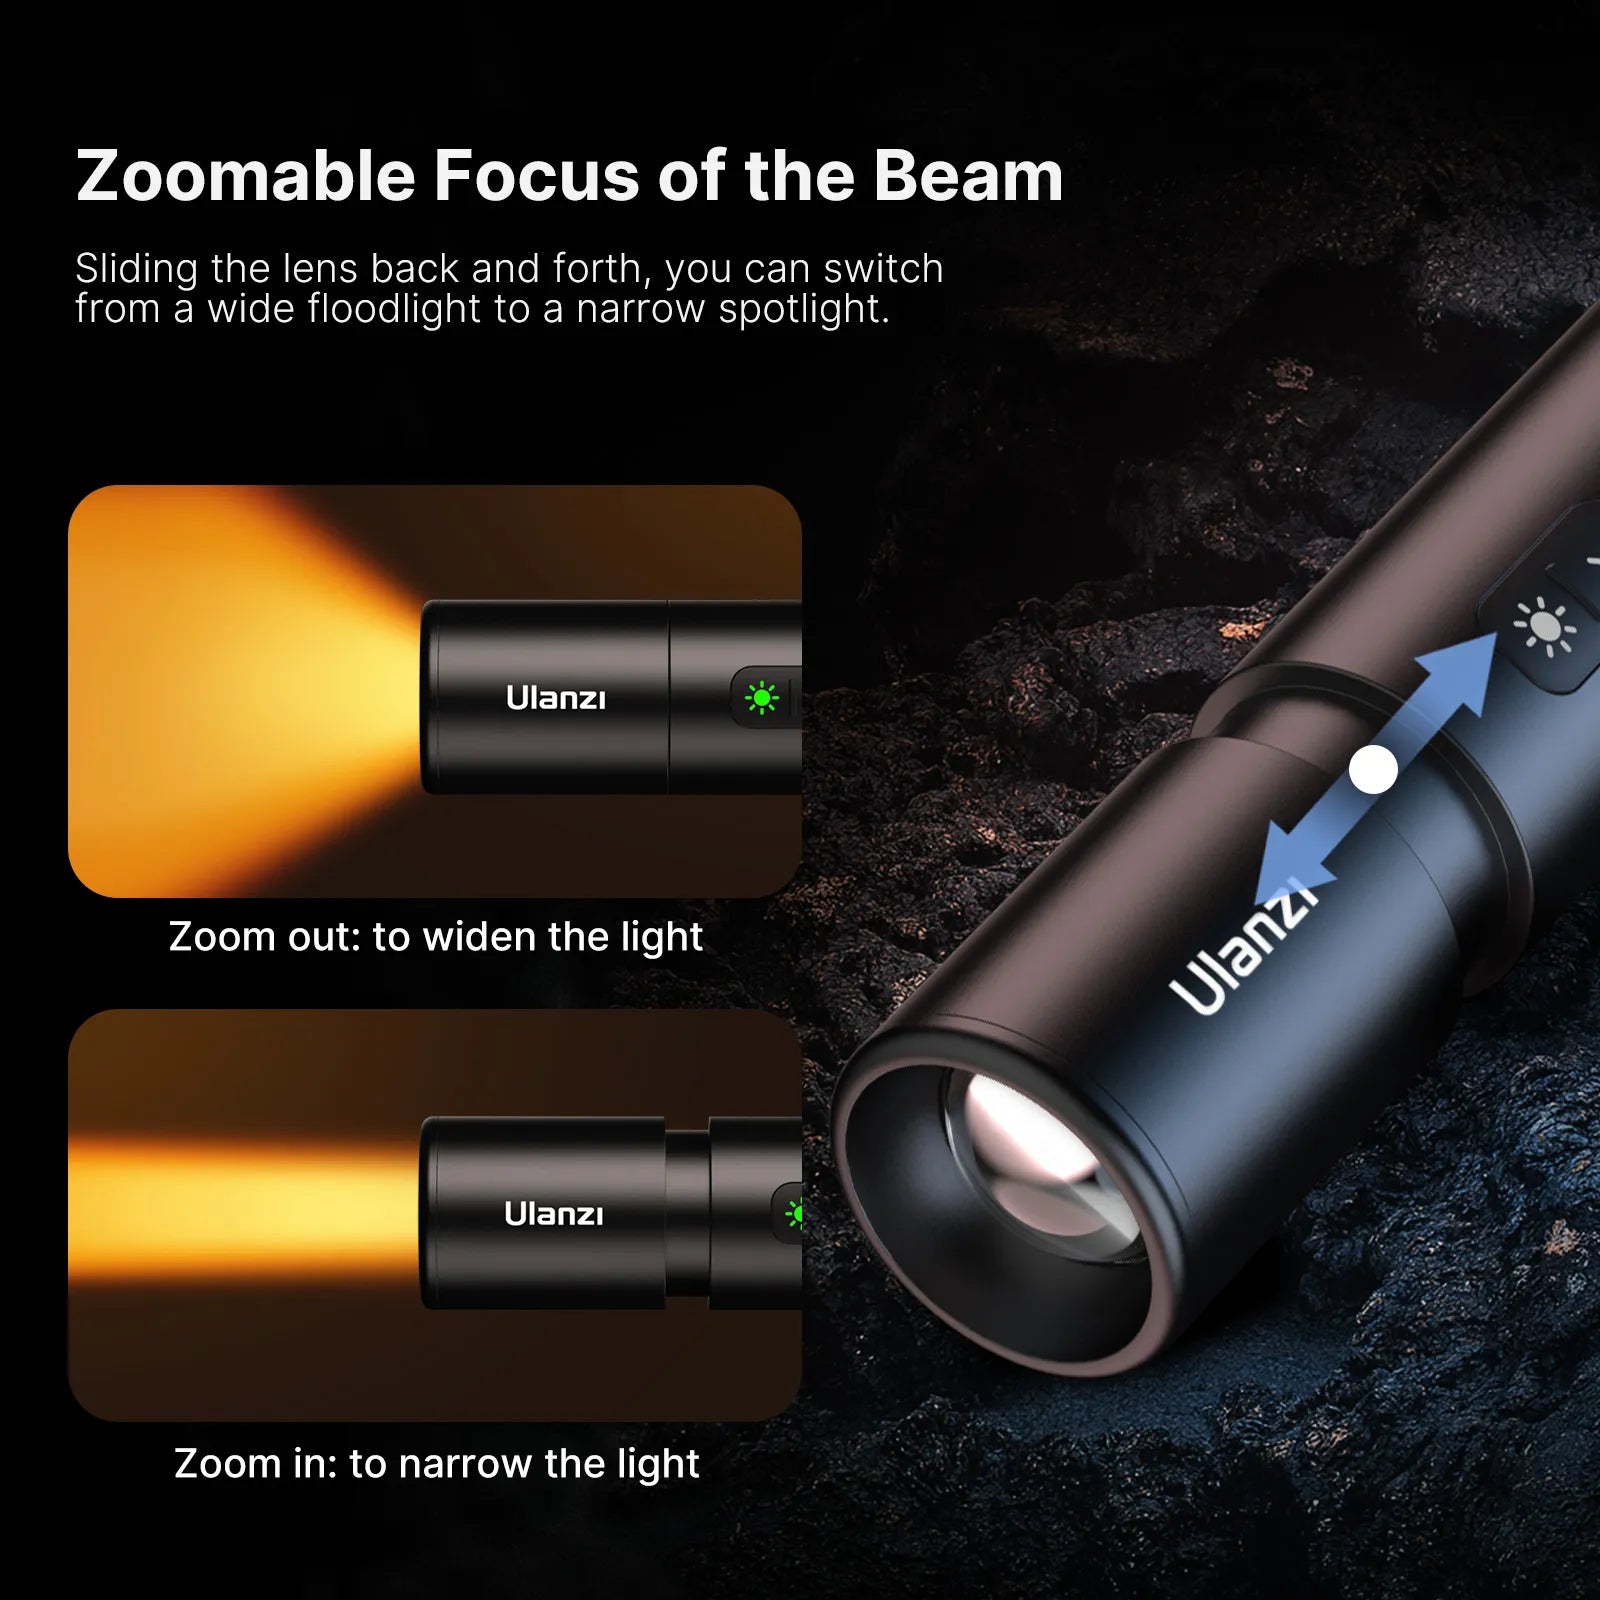 Take control with four brightness levels, flash mode, and zoomable beam focus